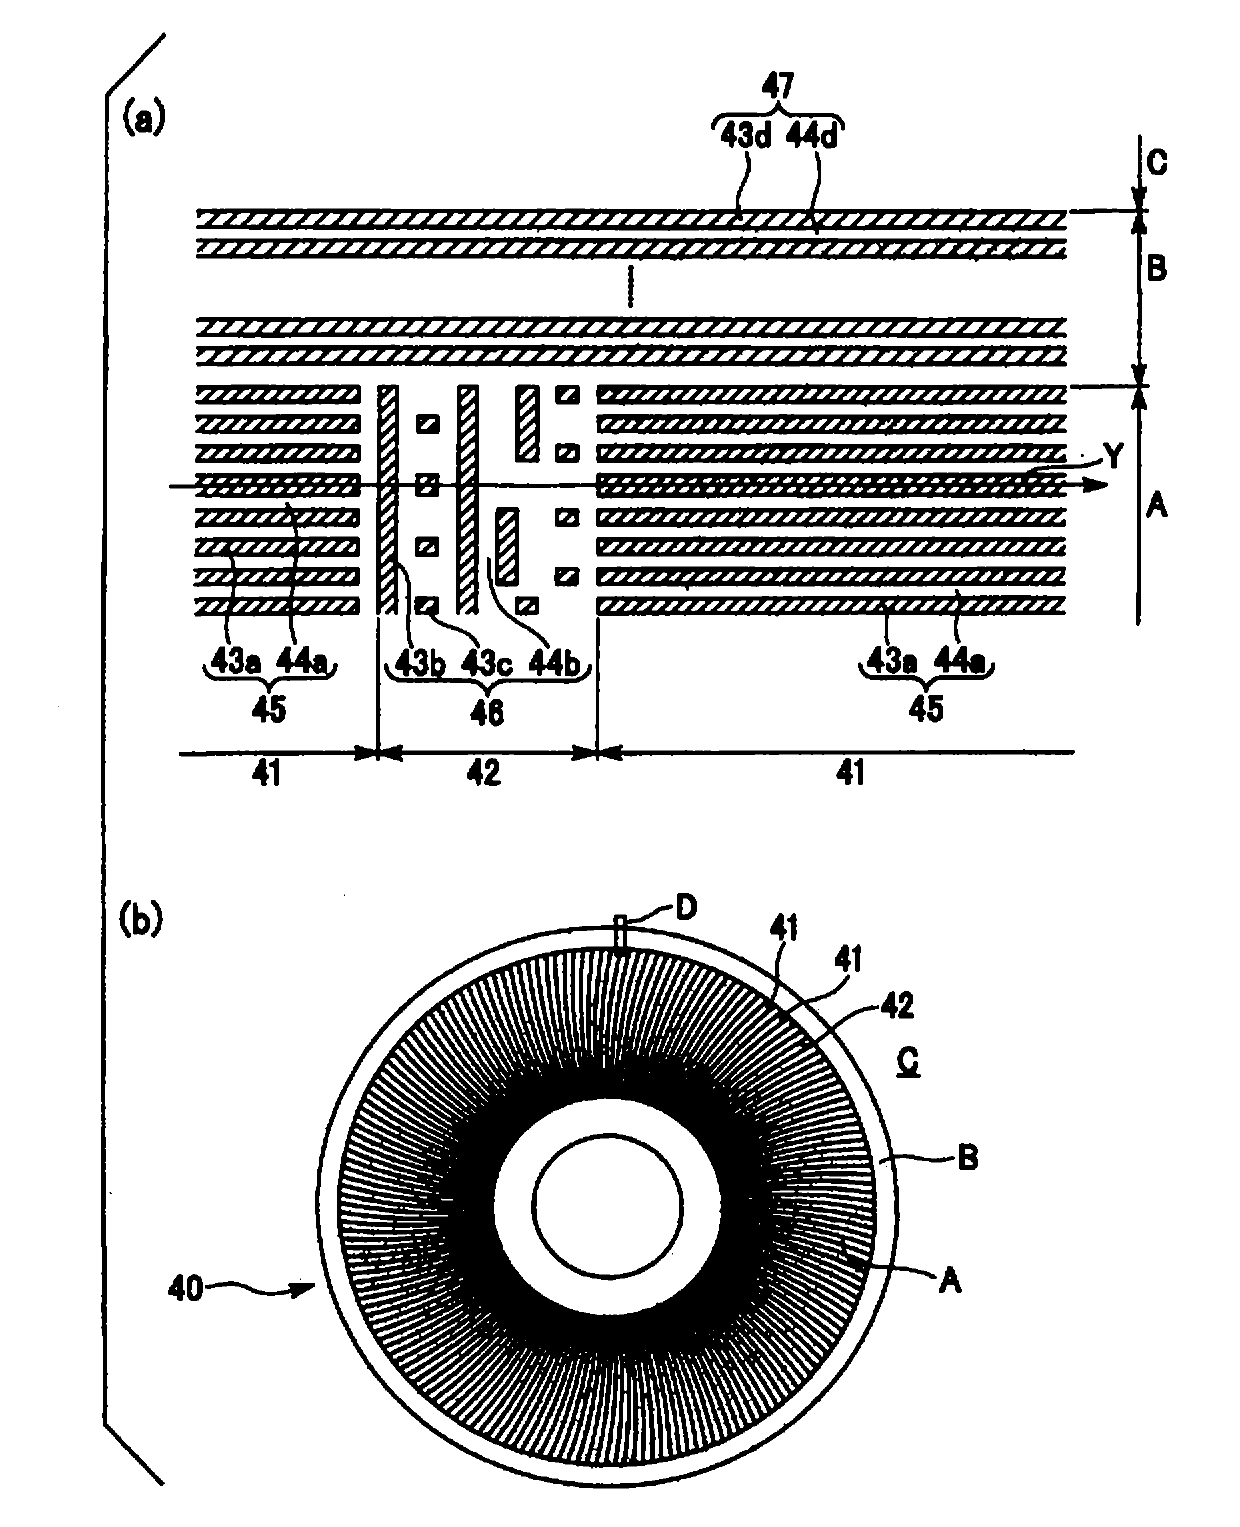 Magnetic recording medium, magnetic recording/reproducing device and method for manufacturing magnetic recording medium